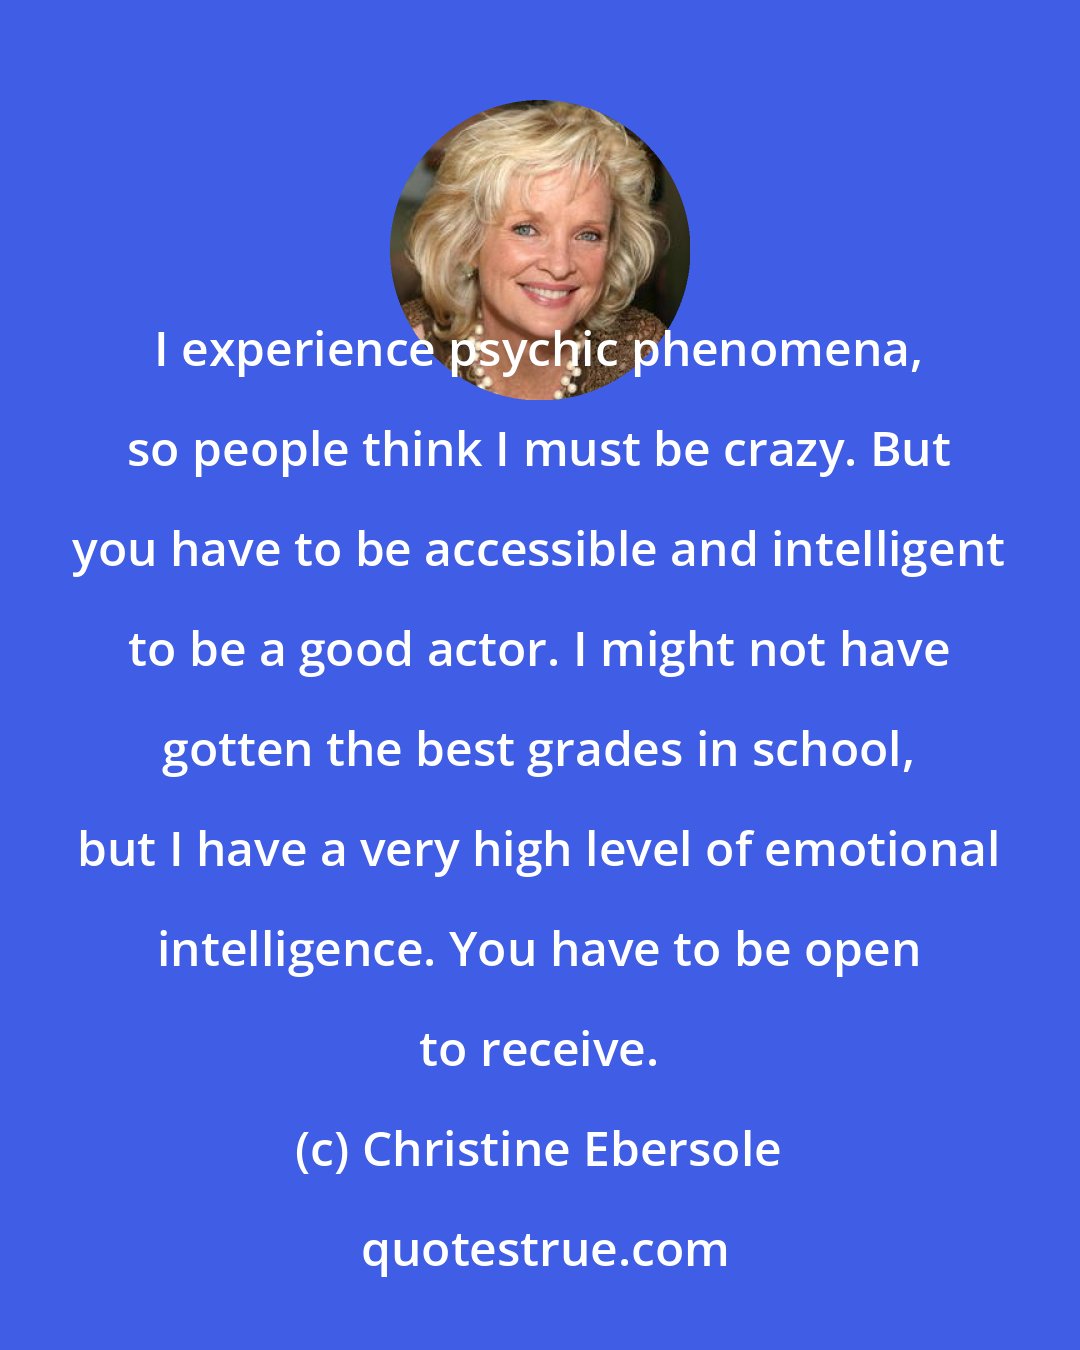 Christine Ebersole: I experience psychic phenomena, so people think I must be crazy. But you have to be accessible and intelligent to be a good actor. I might not have gotten the best grades in school, but I have a very high level of emotional intelligence. You have to be open to receive.